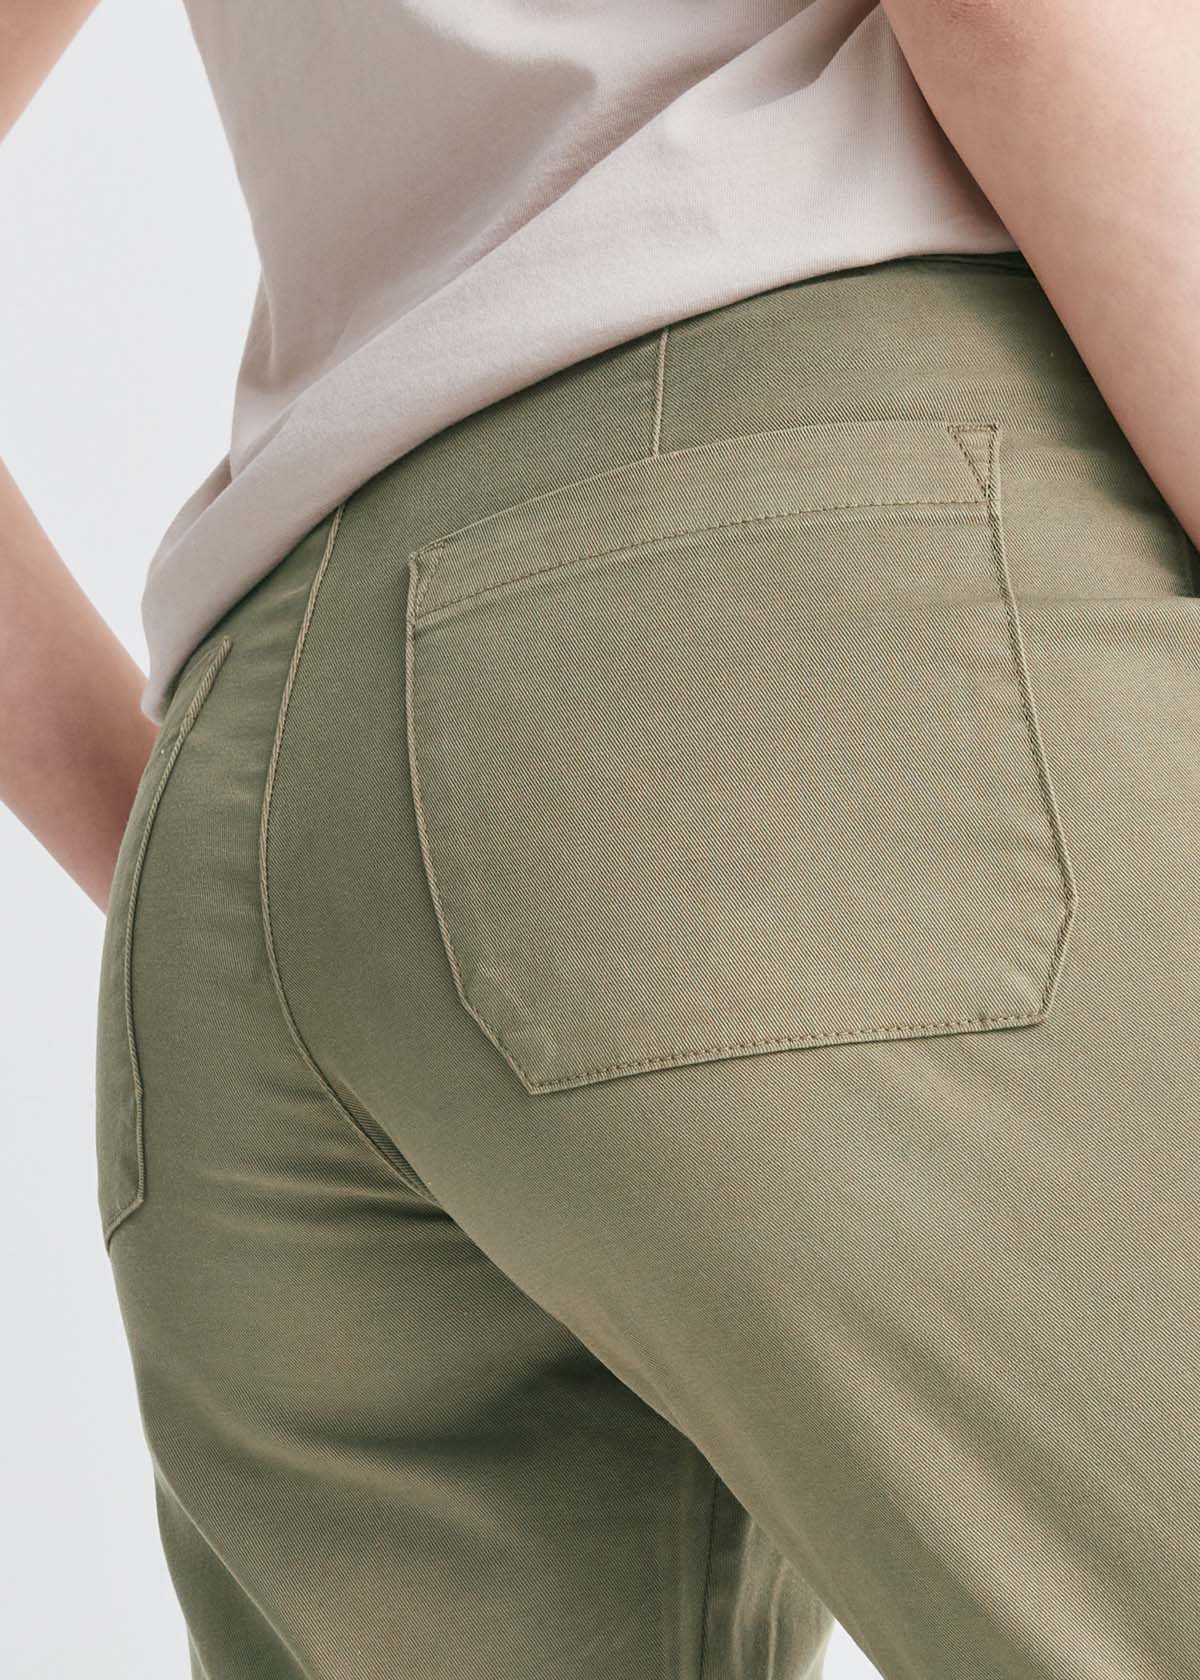 womens high rise green athletic jogger back pocket detail